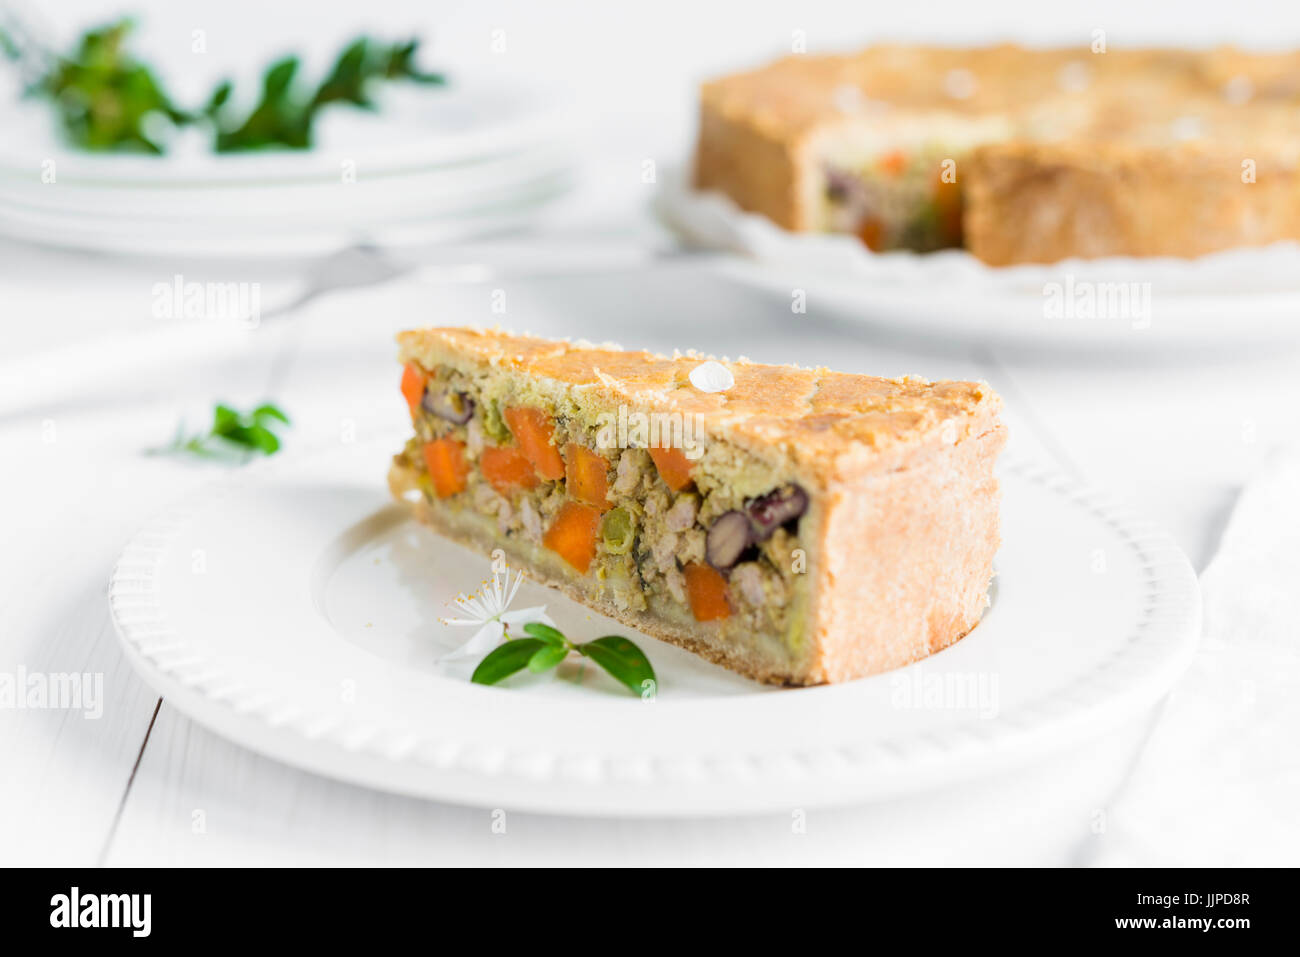 Closeup of a piece of meat pie baked with vegetables, carrots, red beans and peas arranged on white plate and wooden table Stock Photo